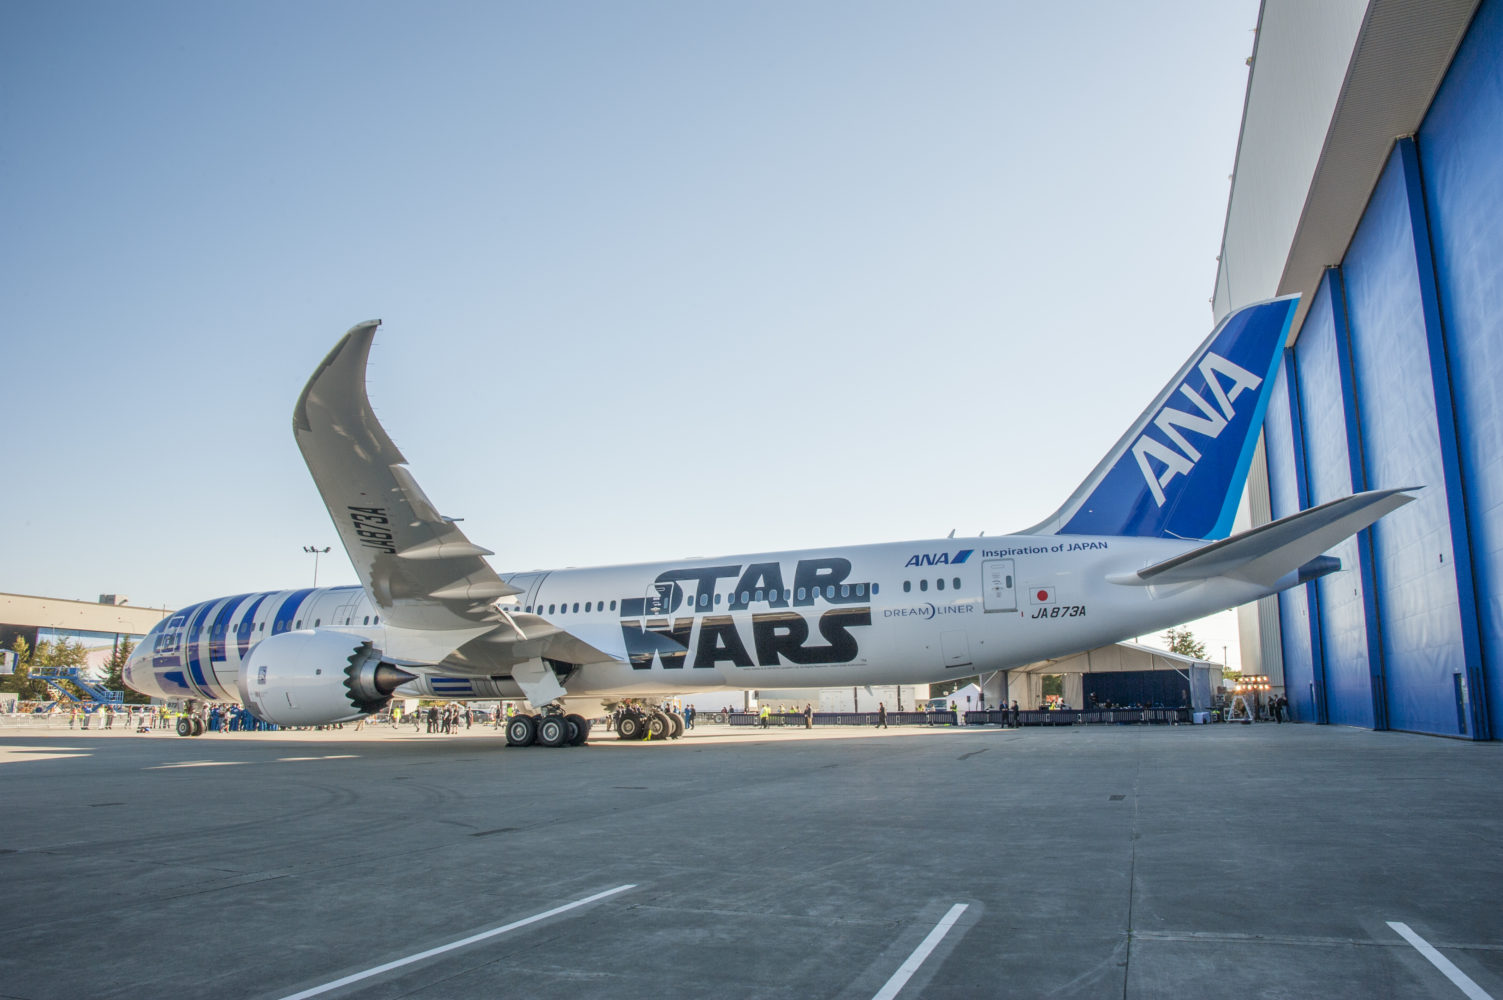 Airports, airlines, & avgeeks mark May the 4th